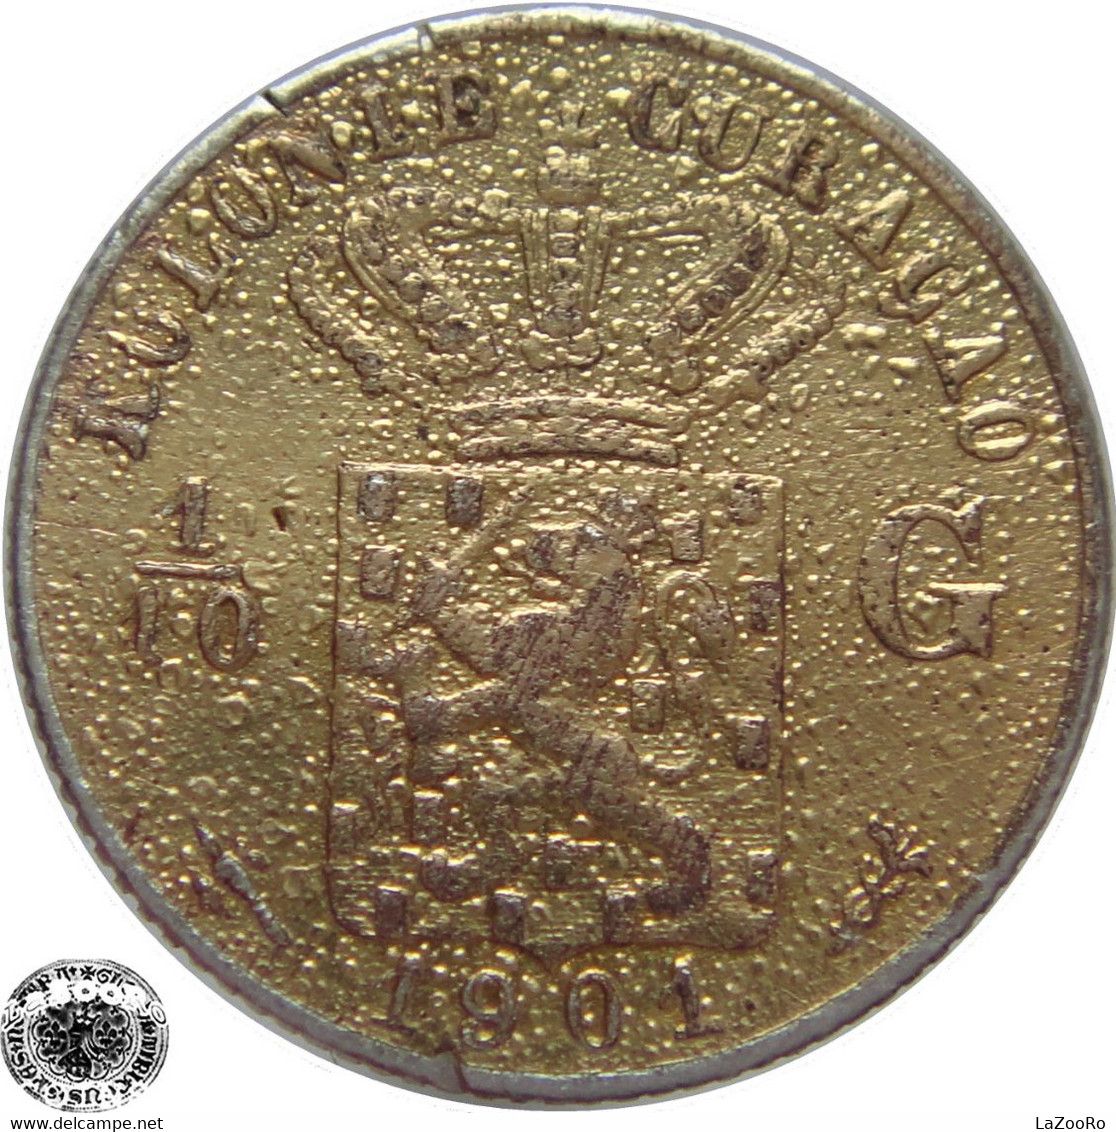 LaZooRo: Curaçao 1/10 Gulden 1901 VF Gold Plated - Silver - Curacao